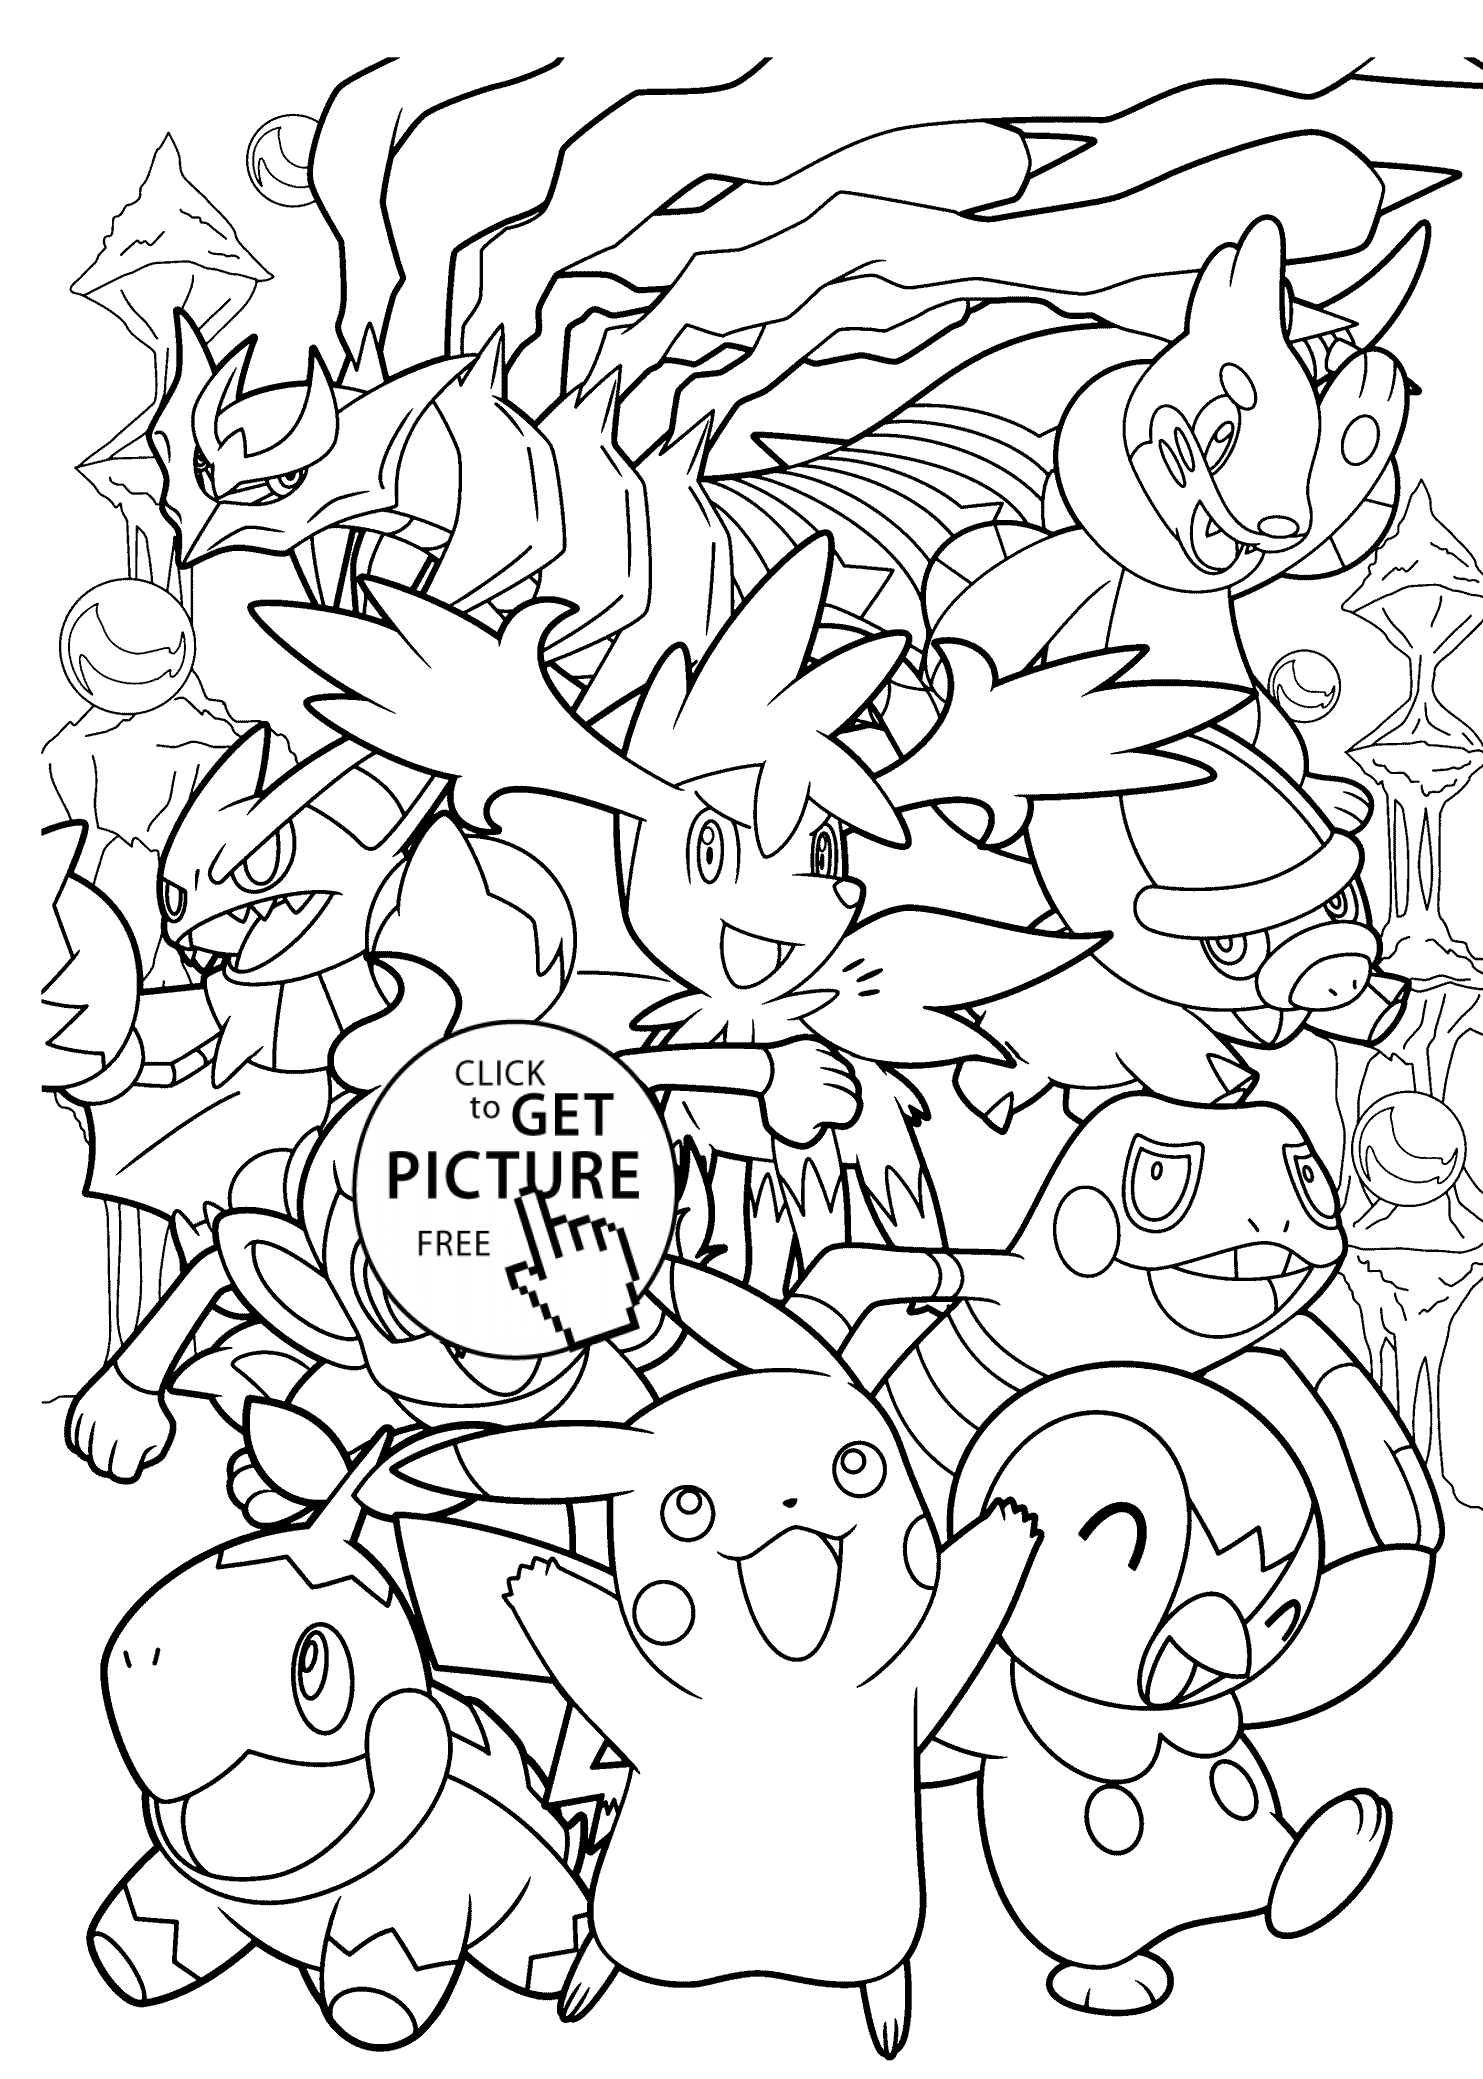 Free Pokemon Coloring Pages Black And White   Coloring Home